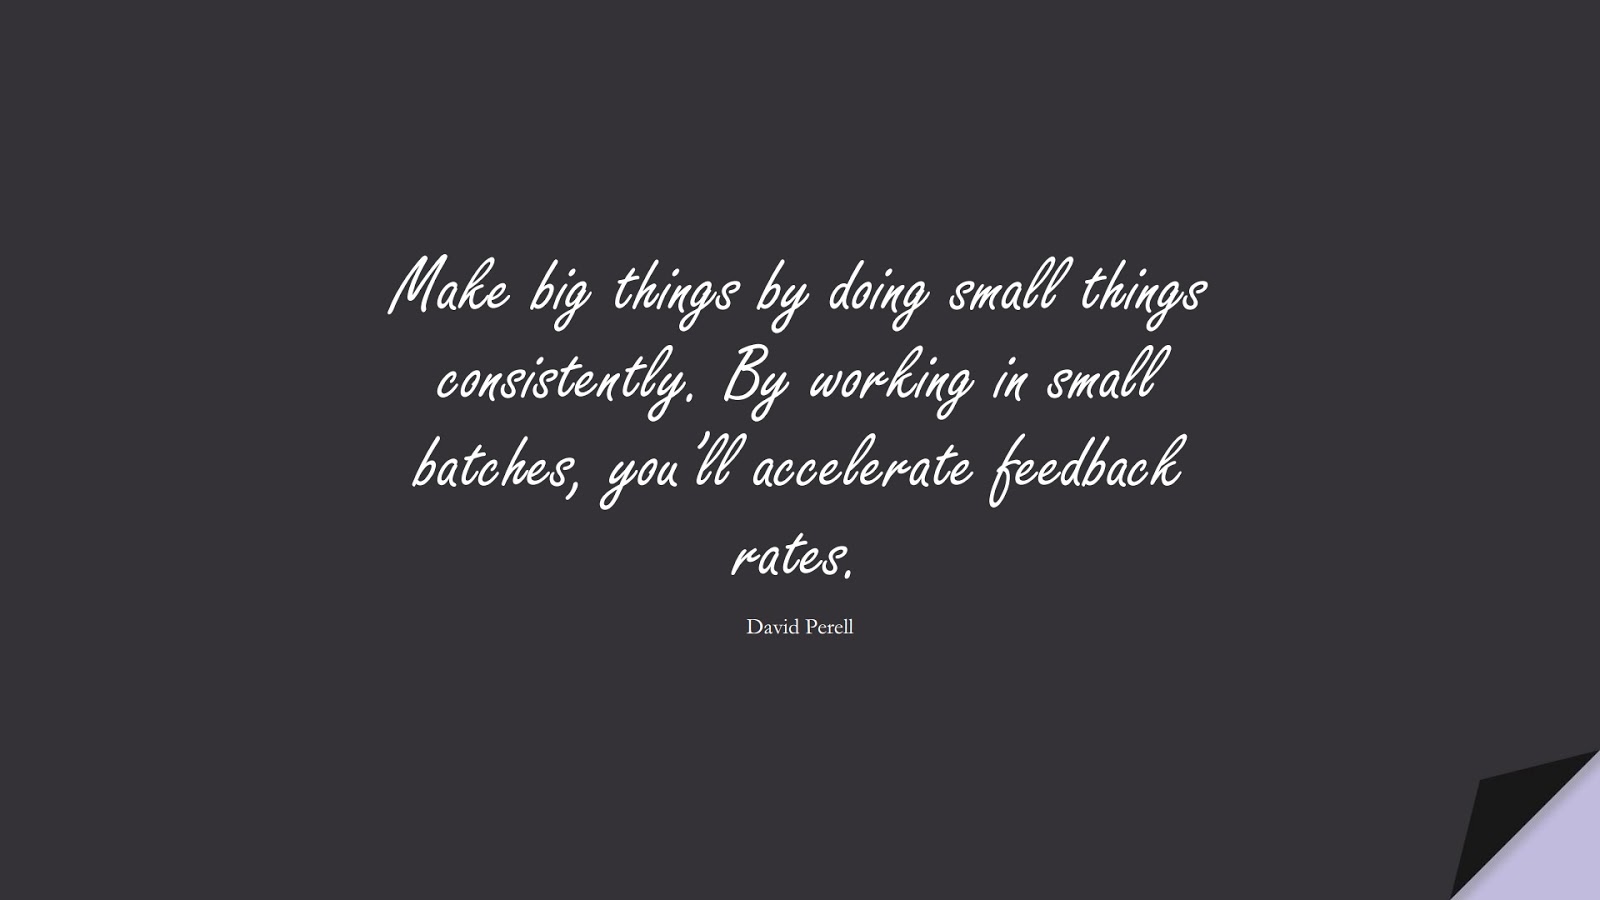 Make big things by doing small things consistently. By working in small batches, you’ll accelerate feedback rates. (David Perell);  #EncouragingQuotes